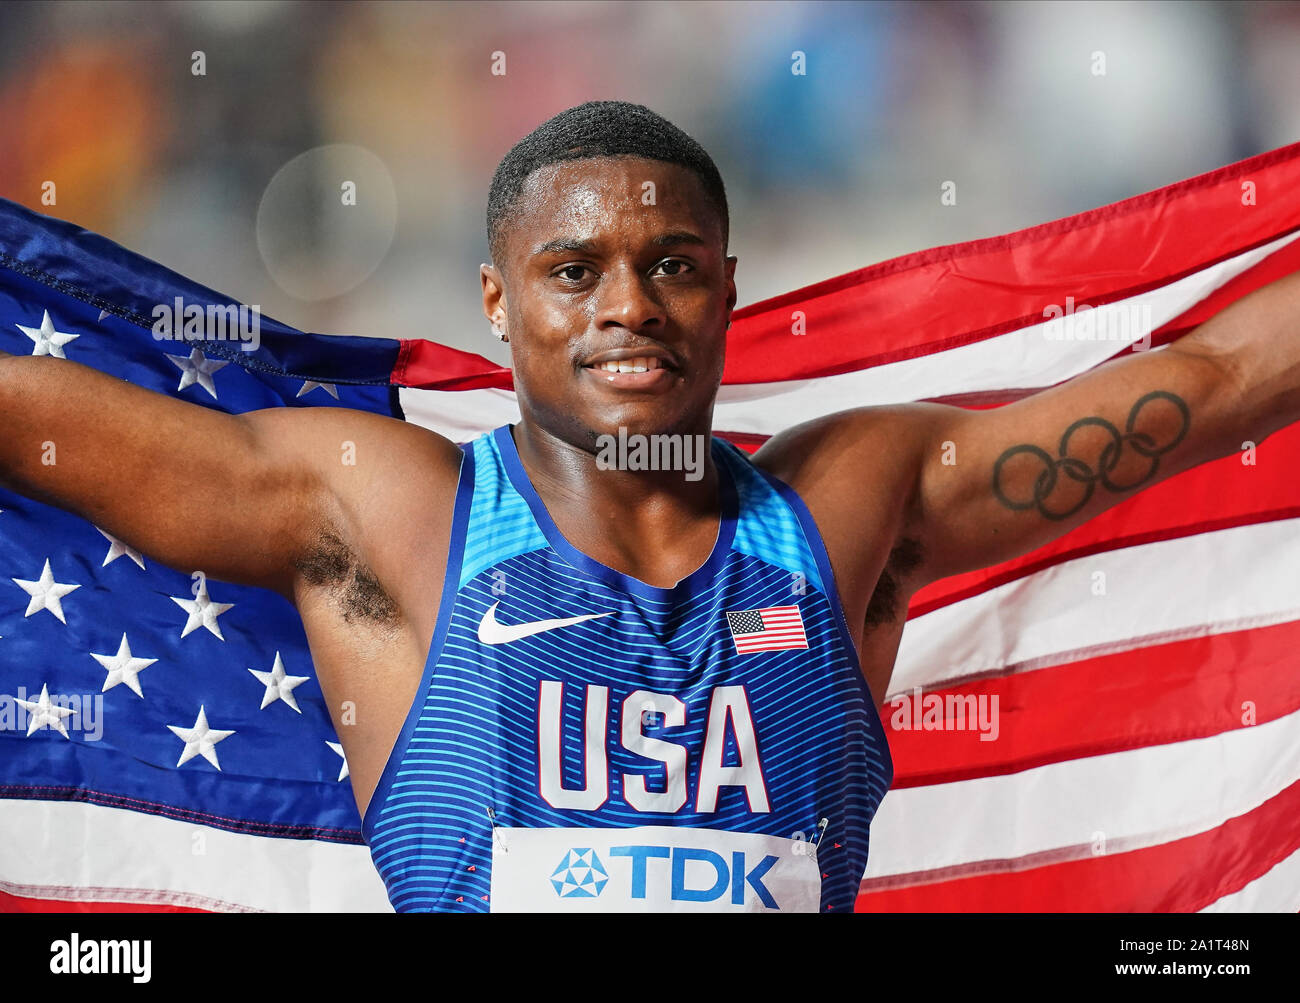 Doha, Qatar. 28th Sep, 2019. Christian Coleman of United States after winning in the 100 meter for men during the 17th IAAF World Athletics Championships at the Khalifa Stadium in Doha, Qatar. Ulrik Pedersen/CSM/Alamy Live News Stock Photo